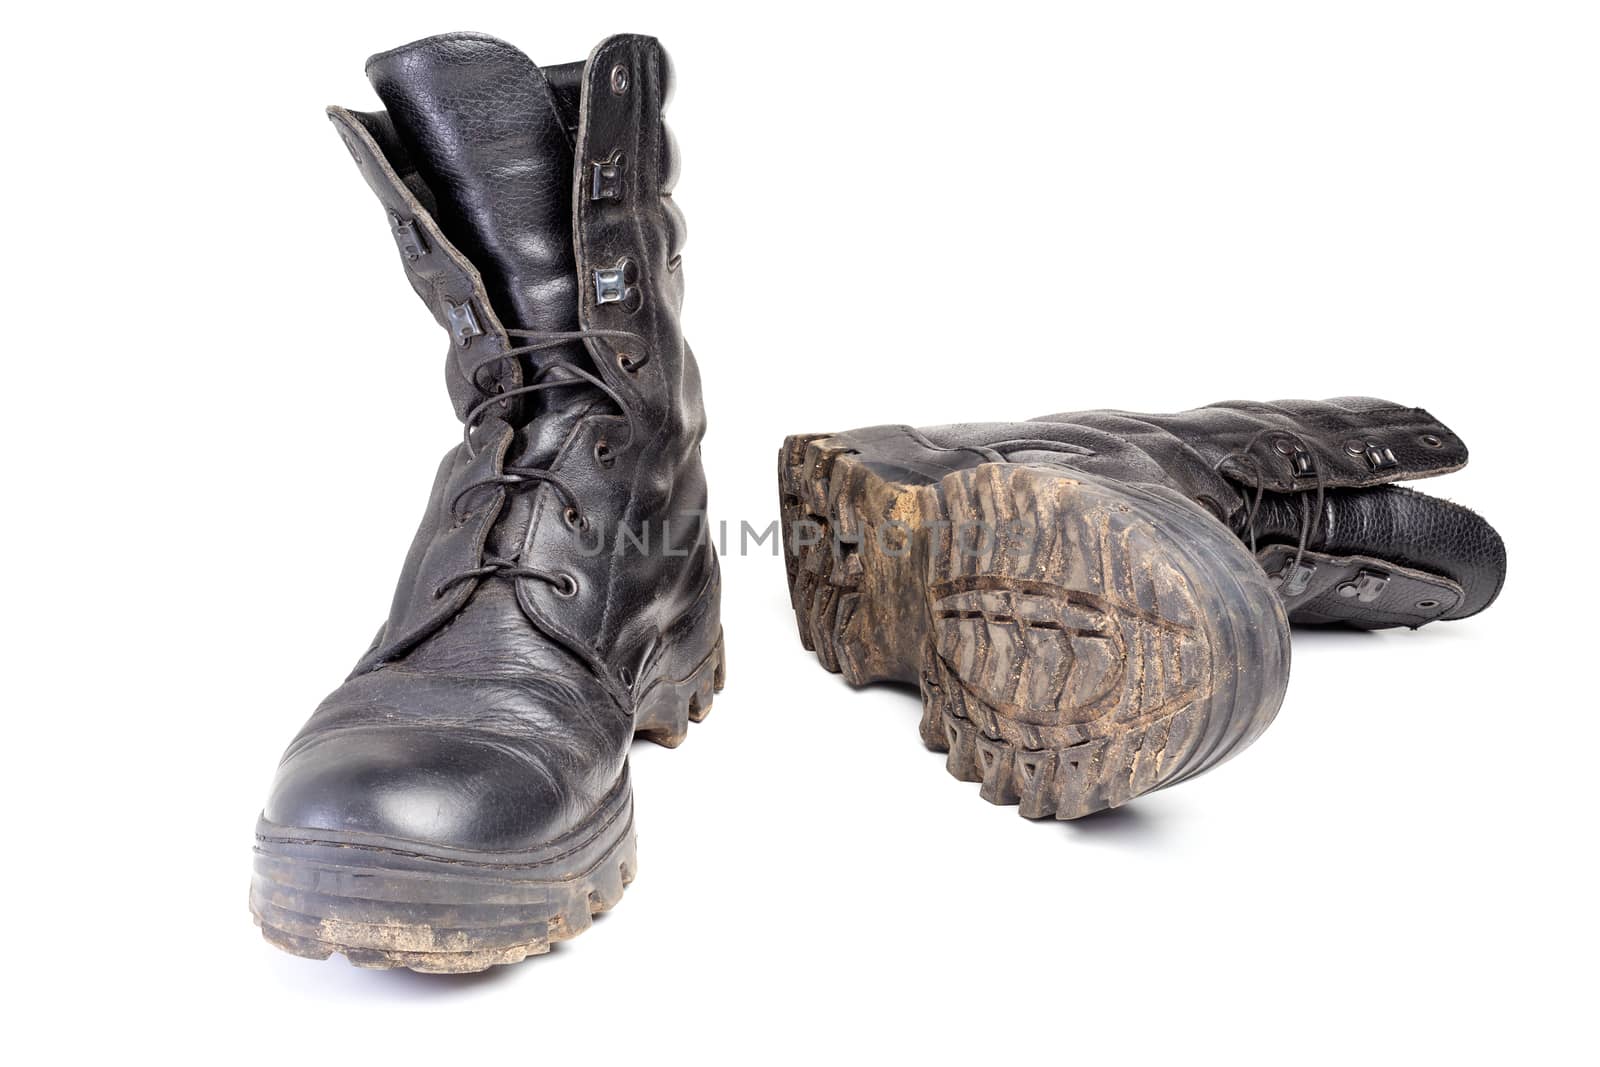 used dirty and dusty military black boots isolated on white back by z1b